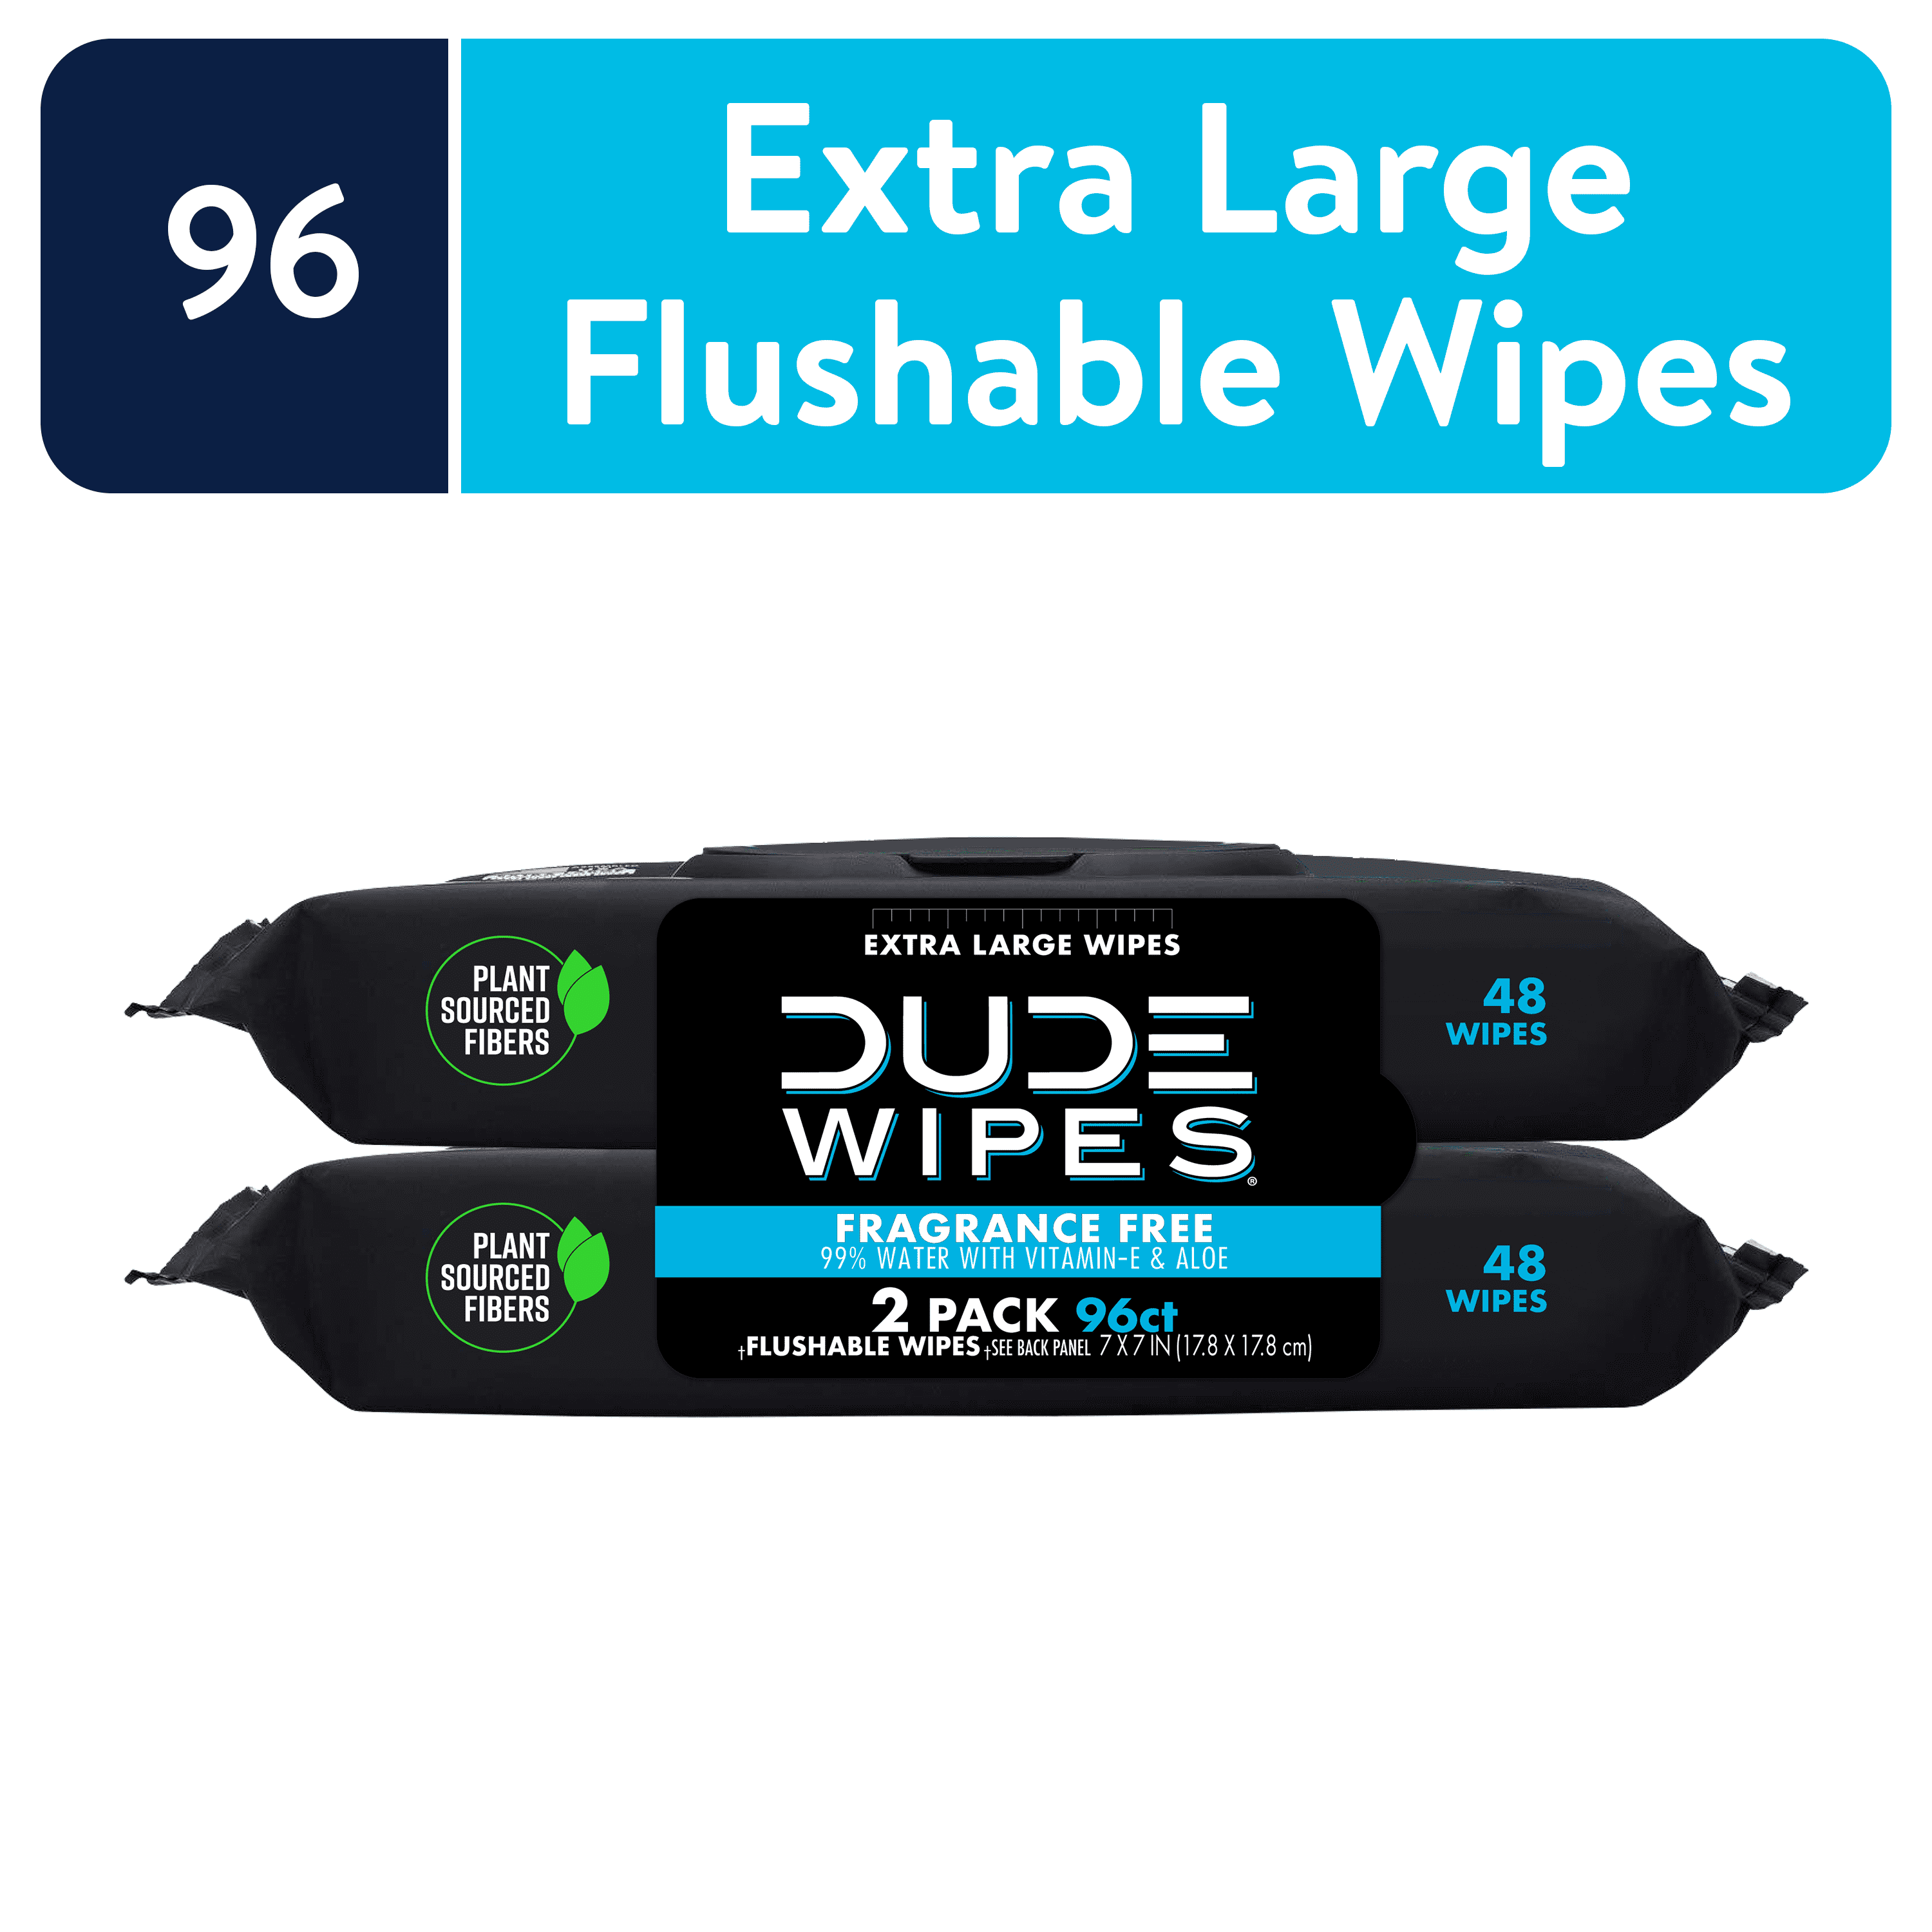 DUDE Wipes Flushable Wipes, Unscented XL Wet Wipes to Use with Toilet Paper, 48 Ct, 2 Pack